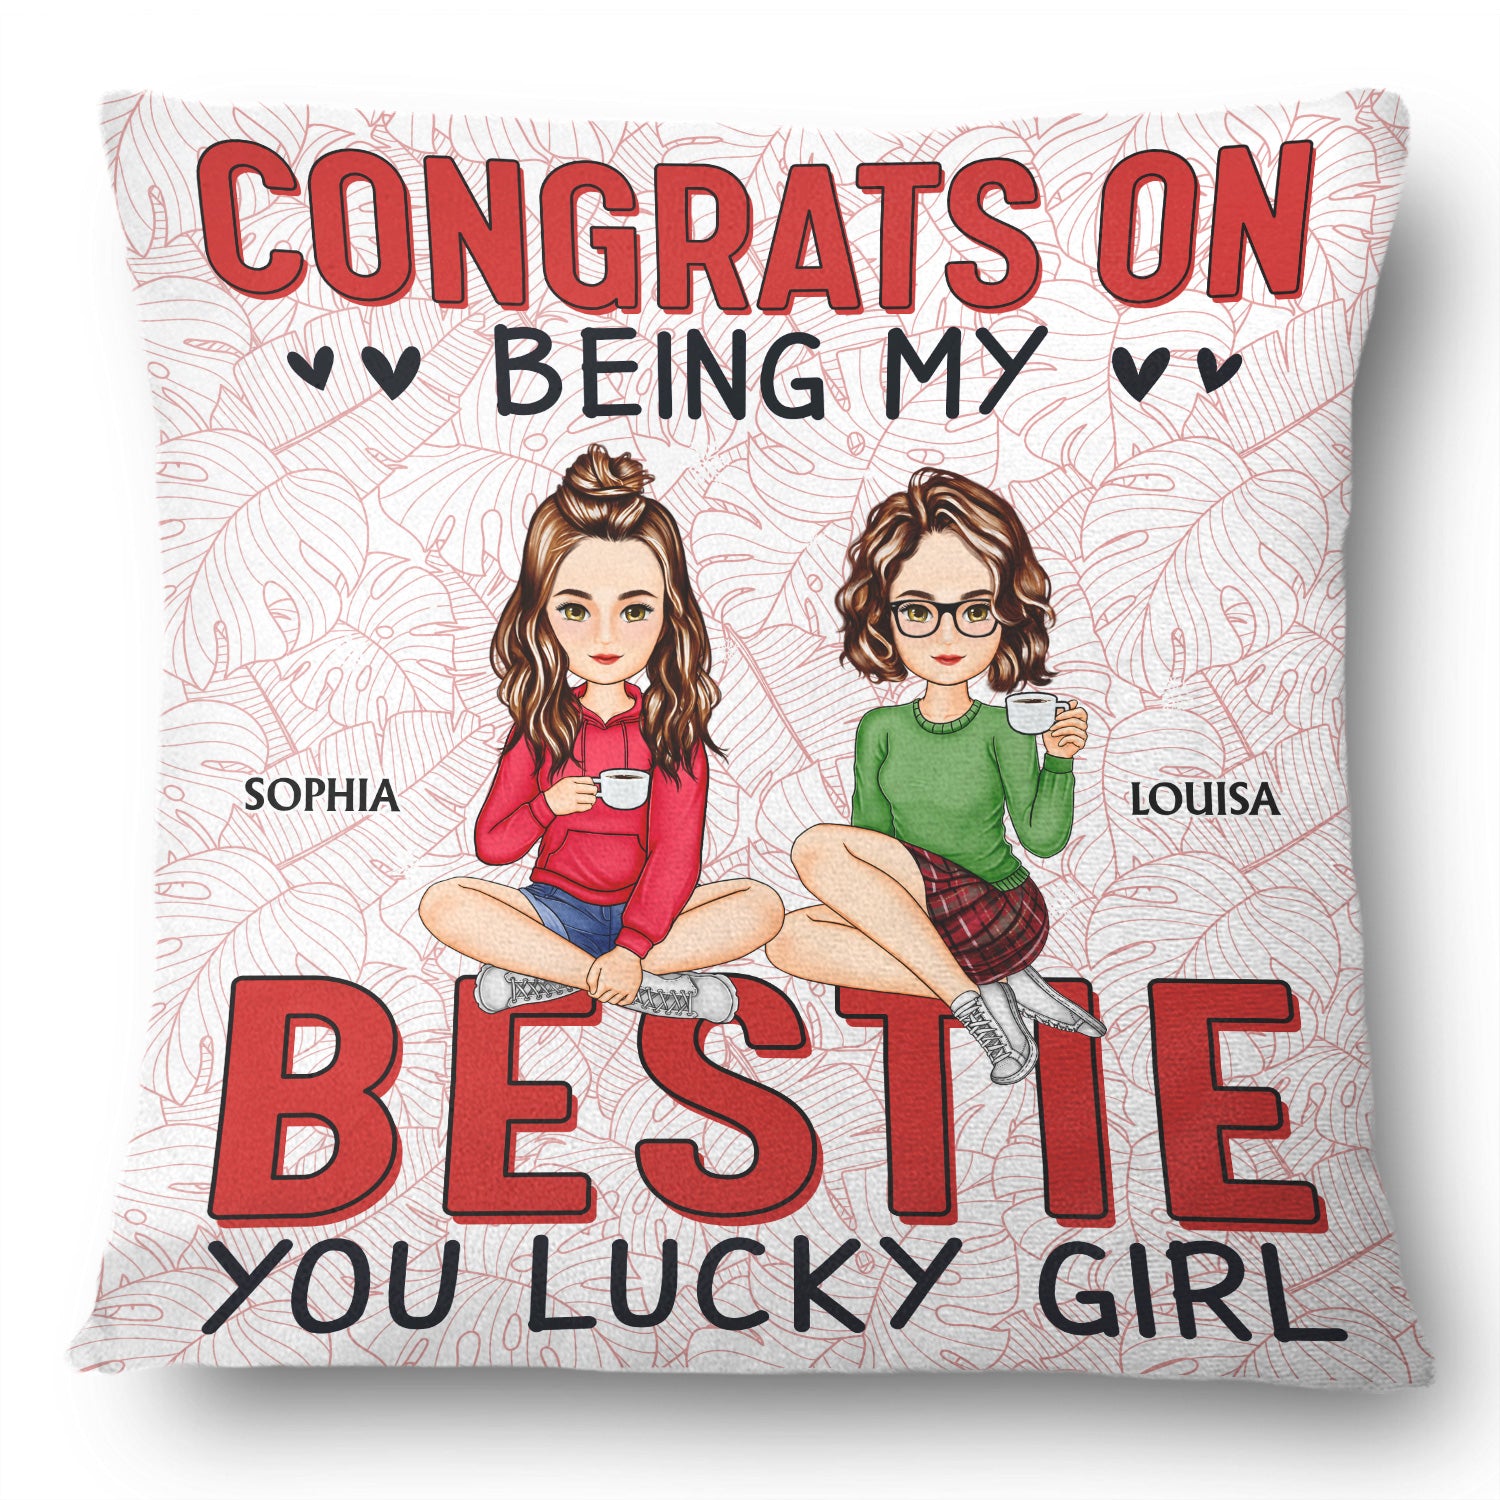 Congrats On Being My Bestie You Lucky Girl - Gift For Bestie, Sister - Personalized Pillow